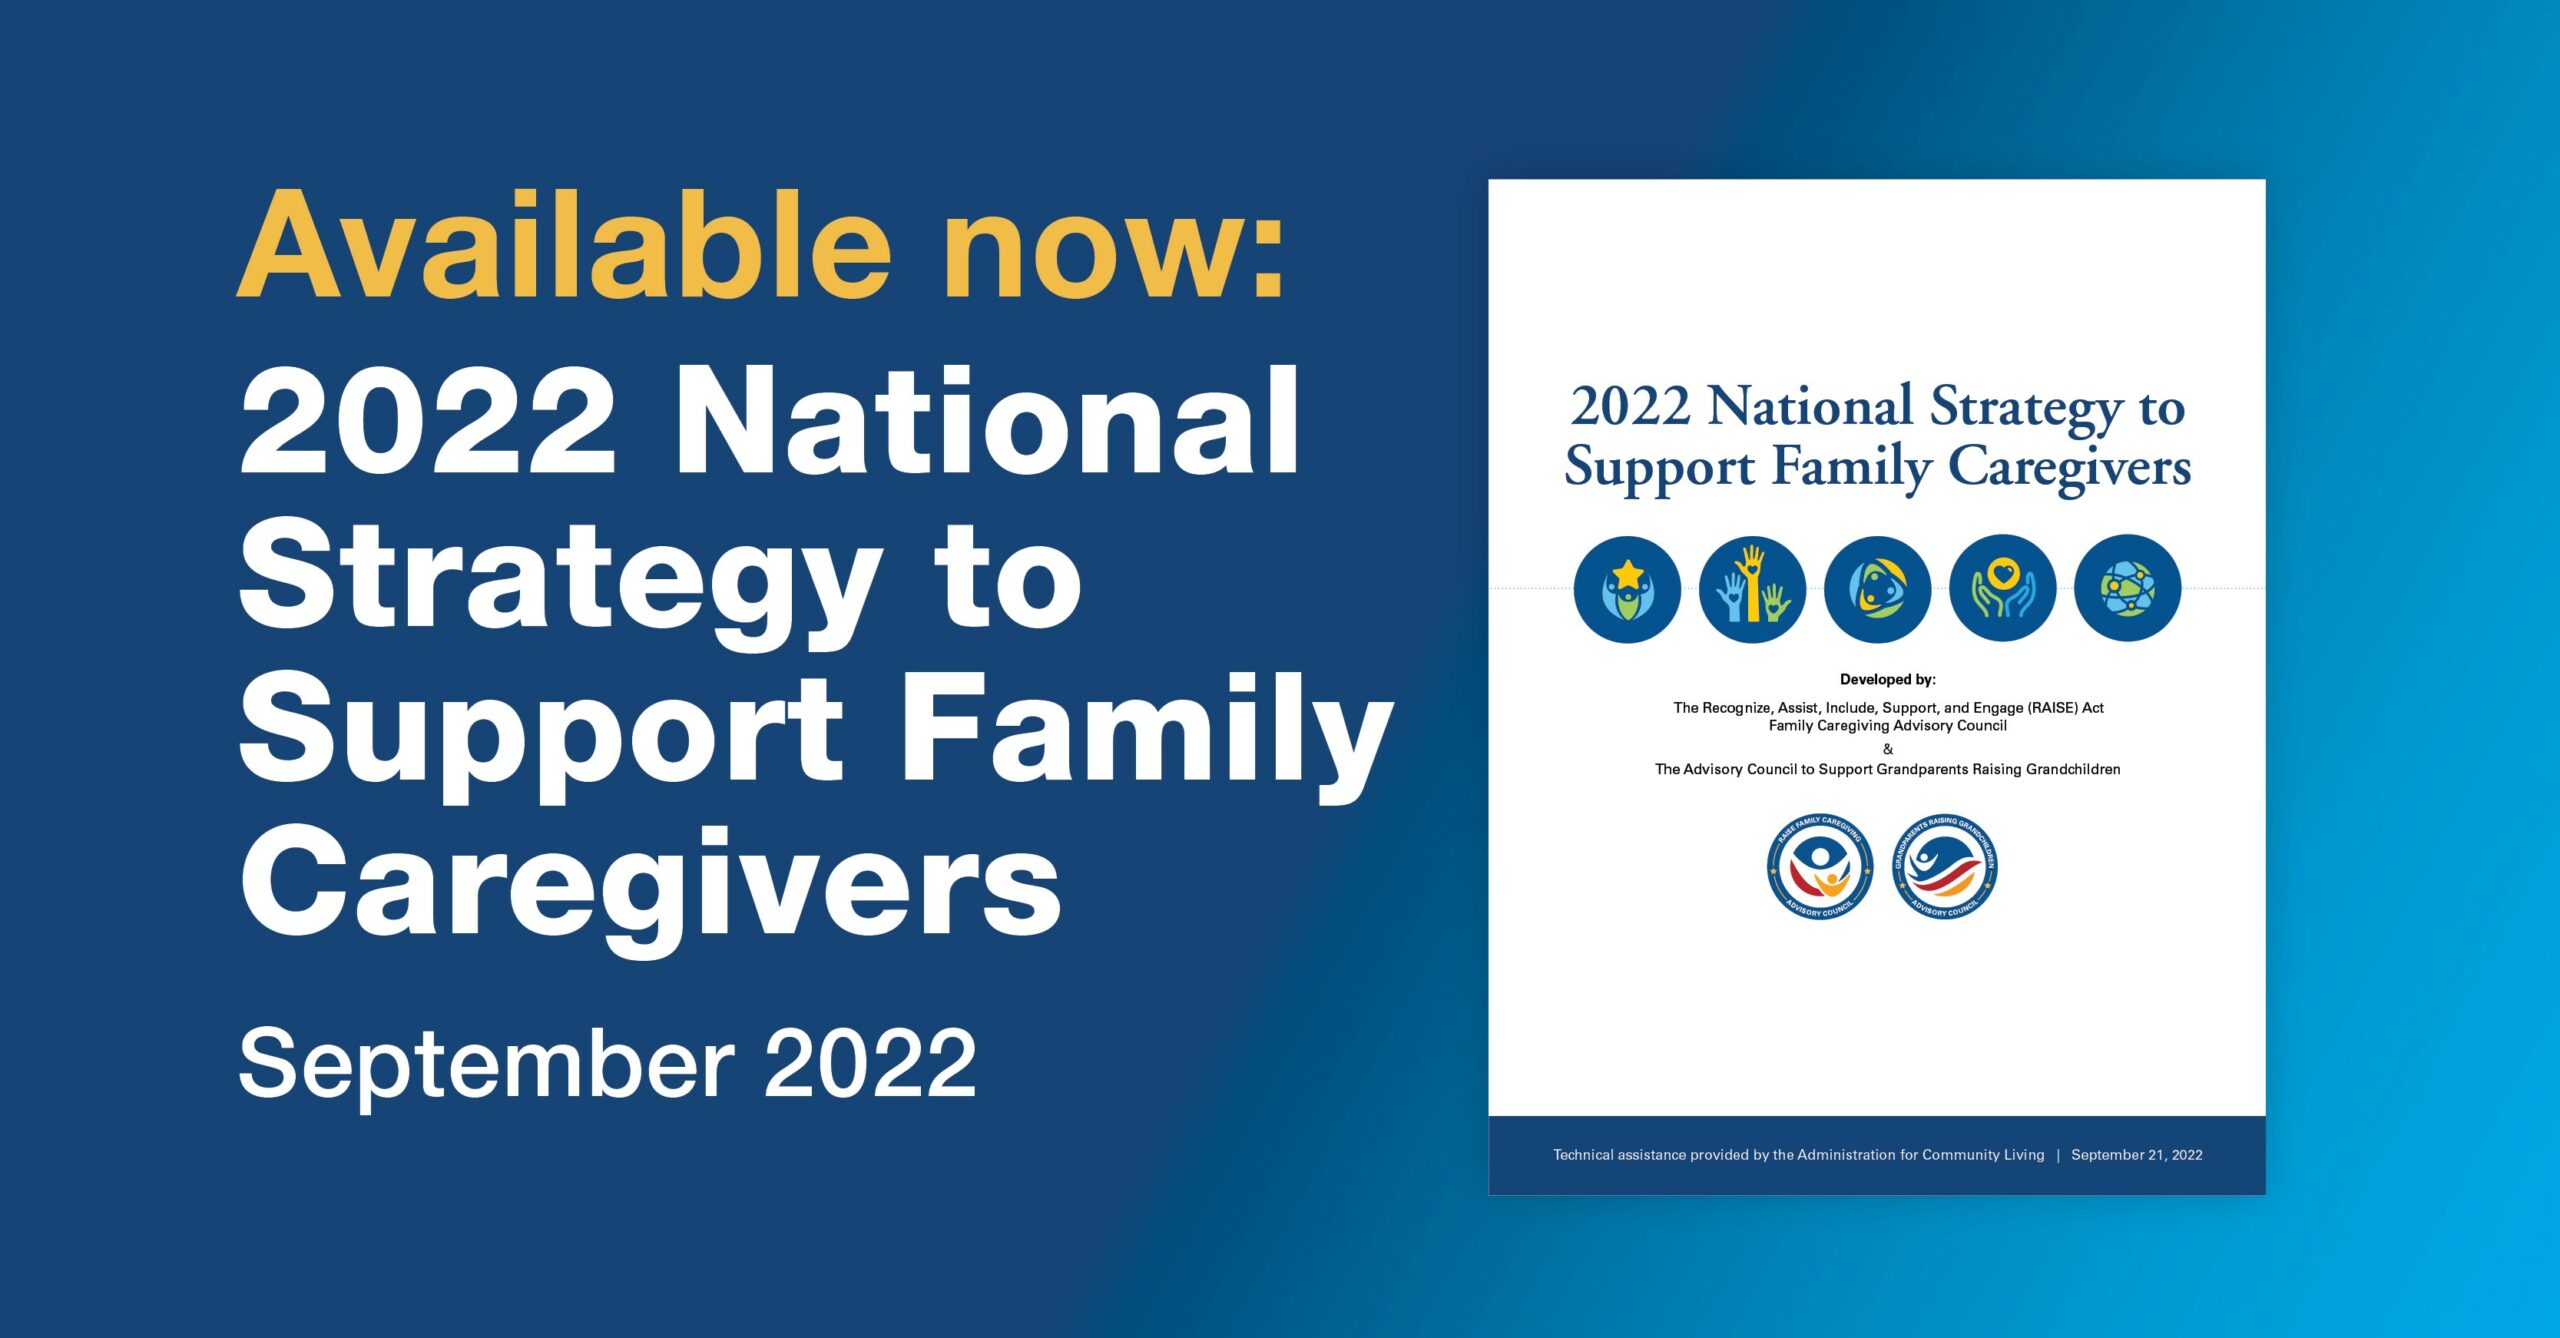 Just Released: The First Ever National Strategy To Support Family Caregivers